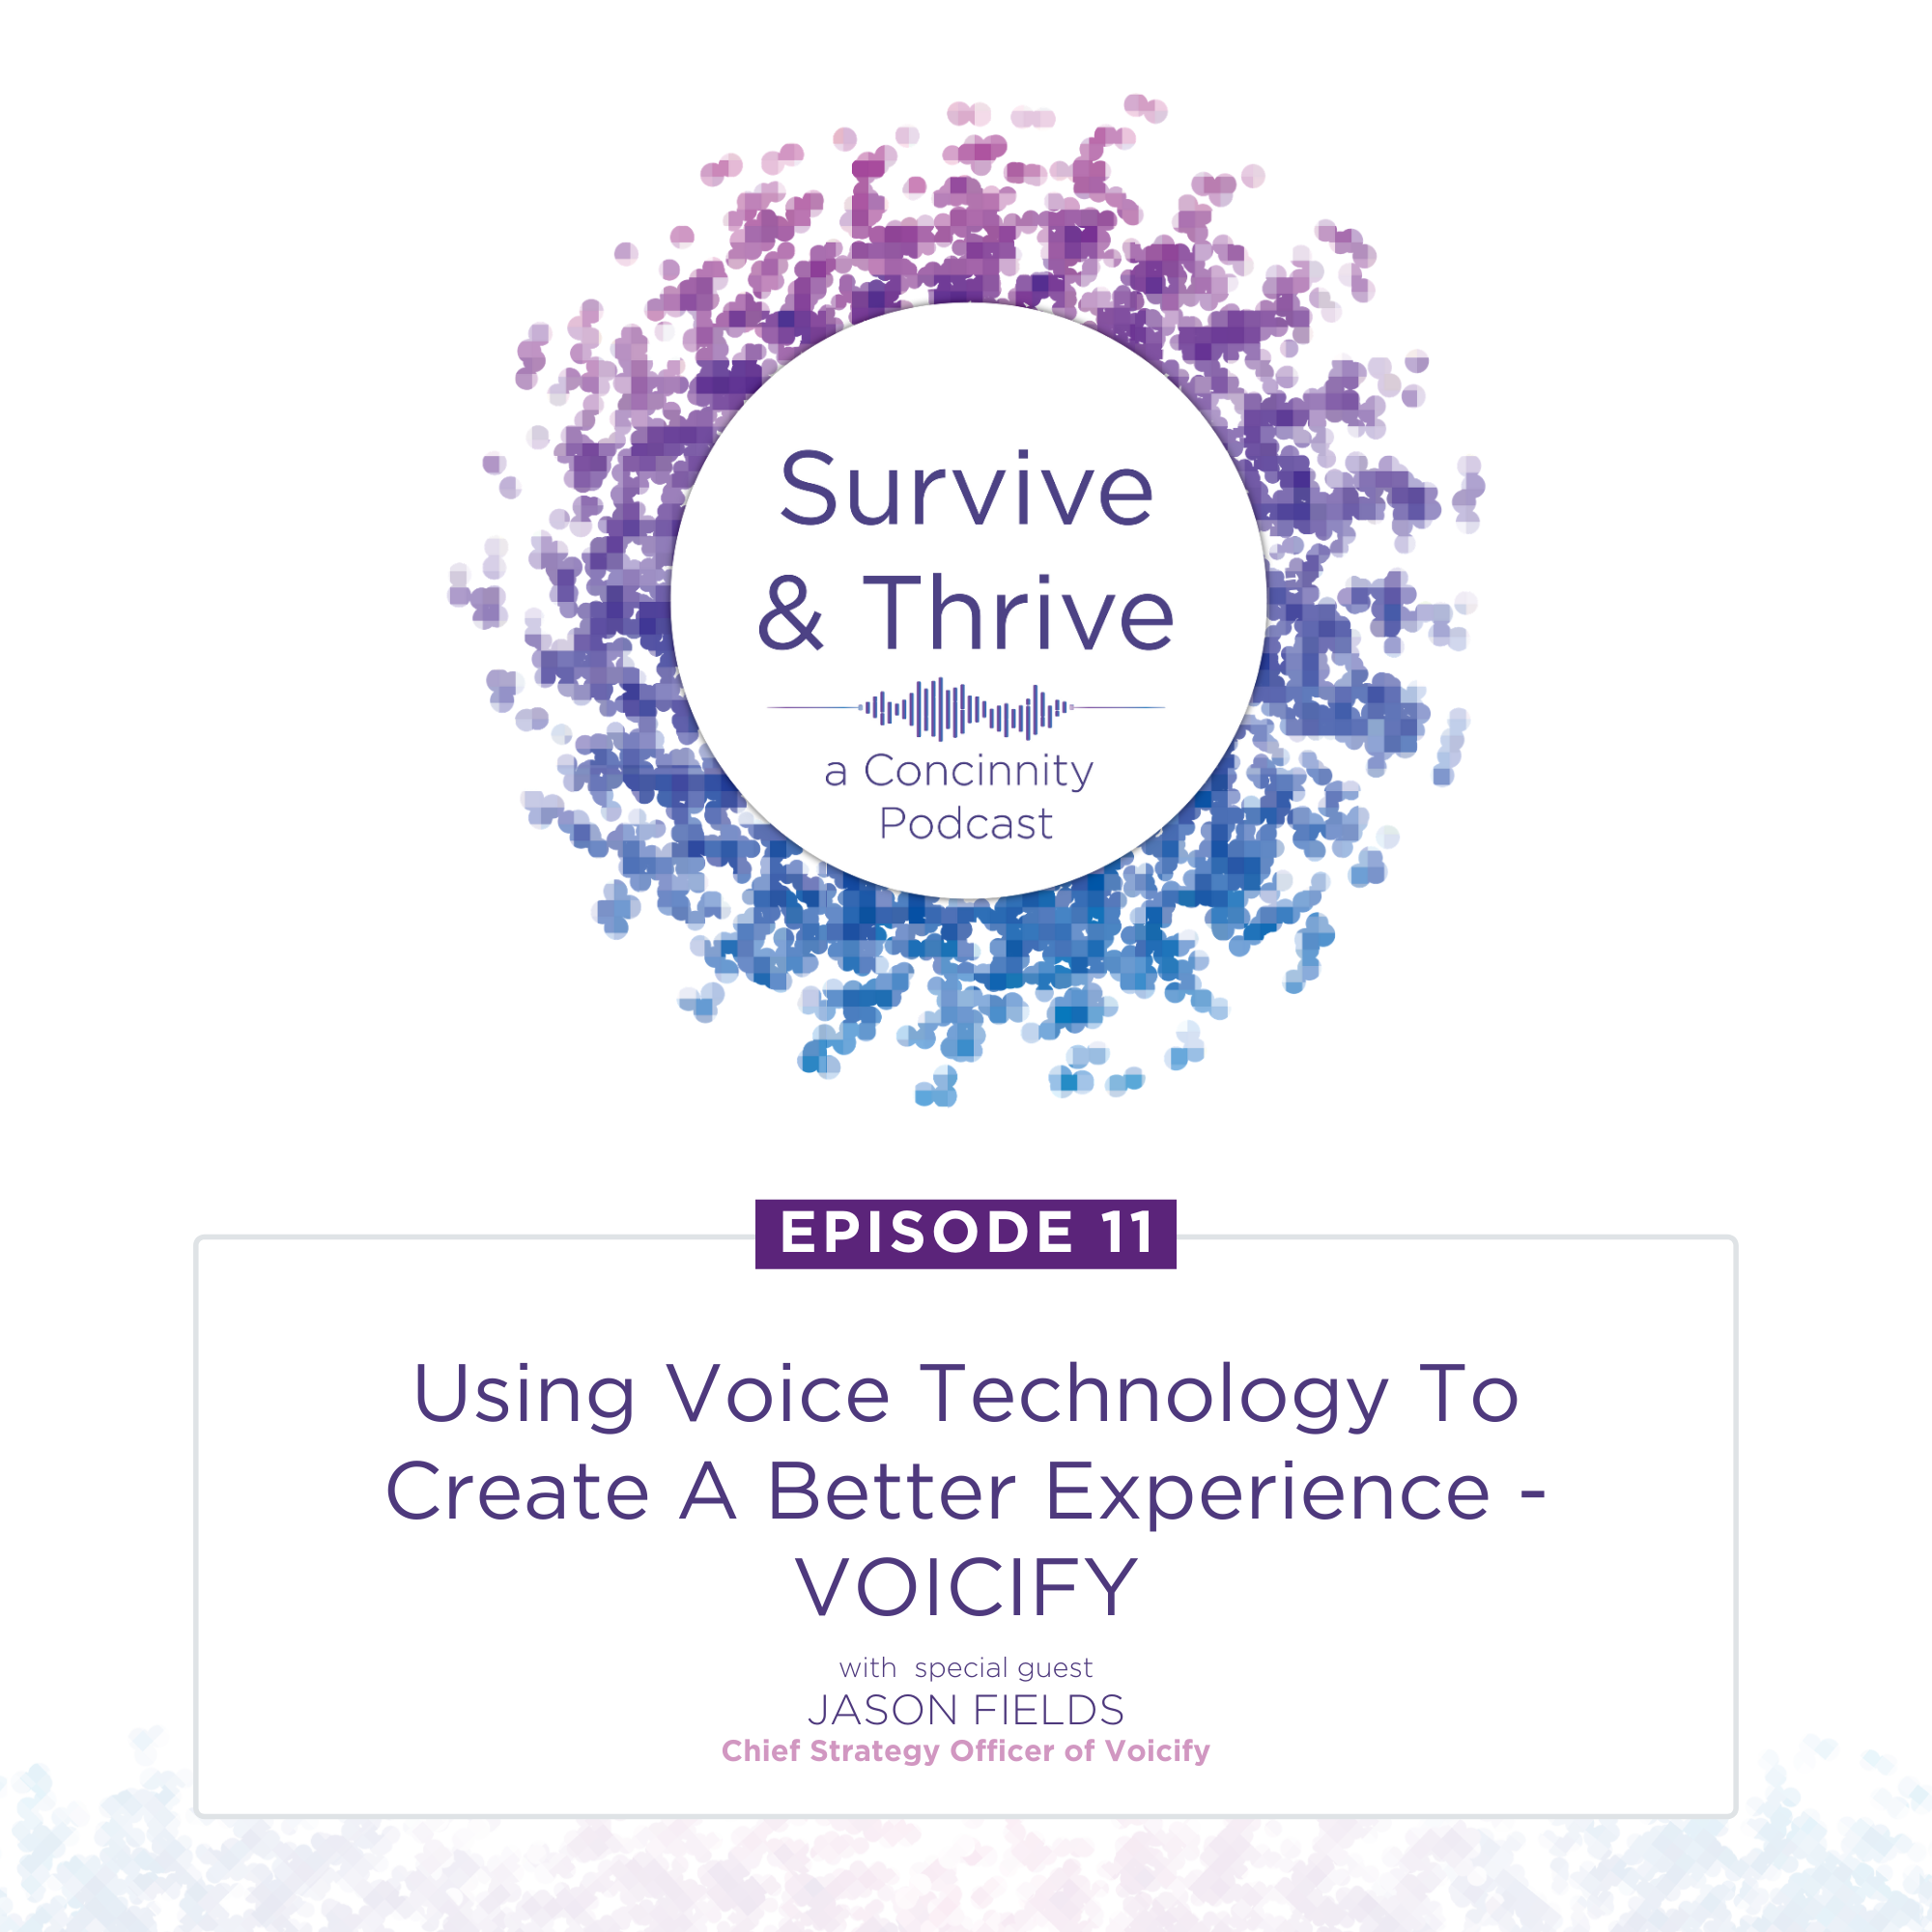 Artwork for podcast Survive & Thrive